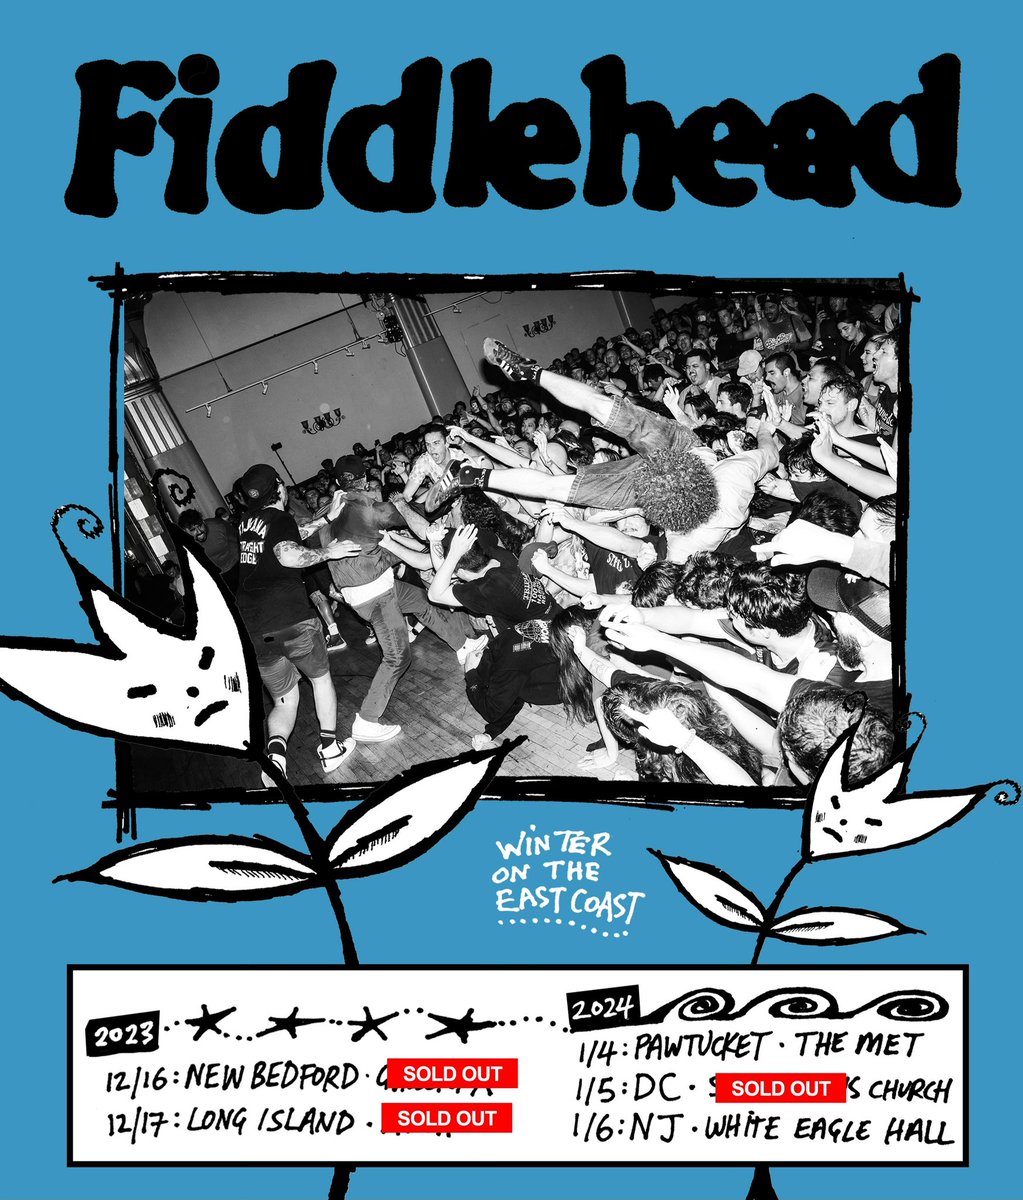 Winter shows with many great bands! If you missed New Bedford and LI tickets, you can come out to RI or Jersey City show! linktr.ee/fiddleheadusa